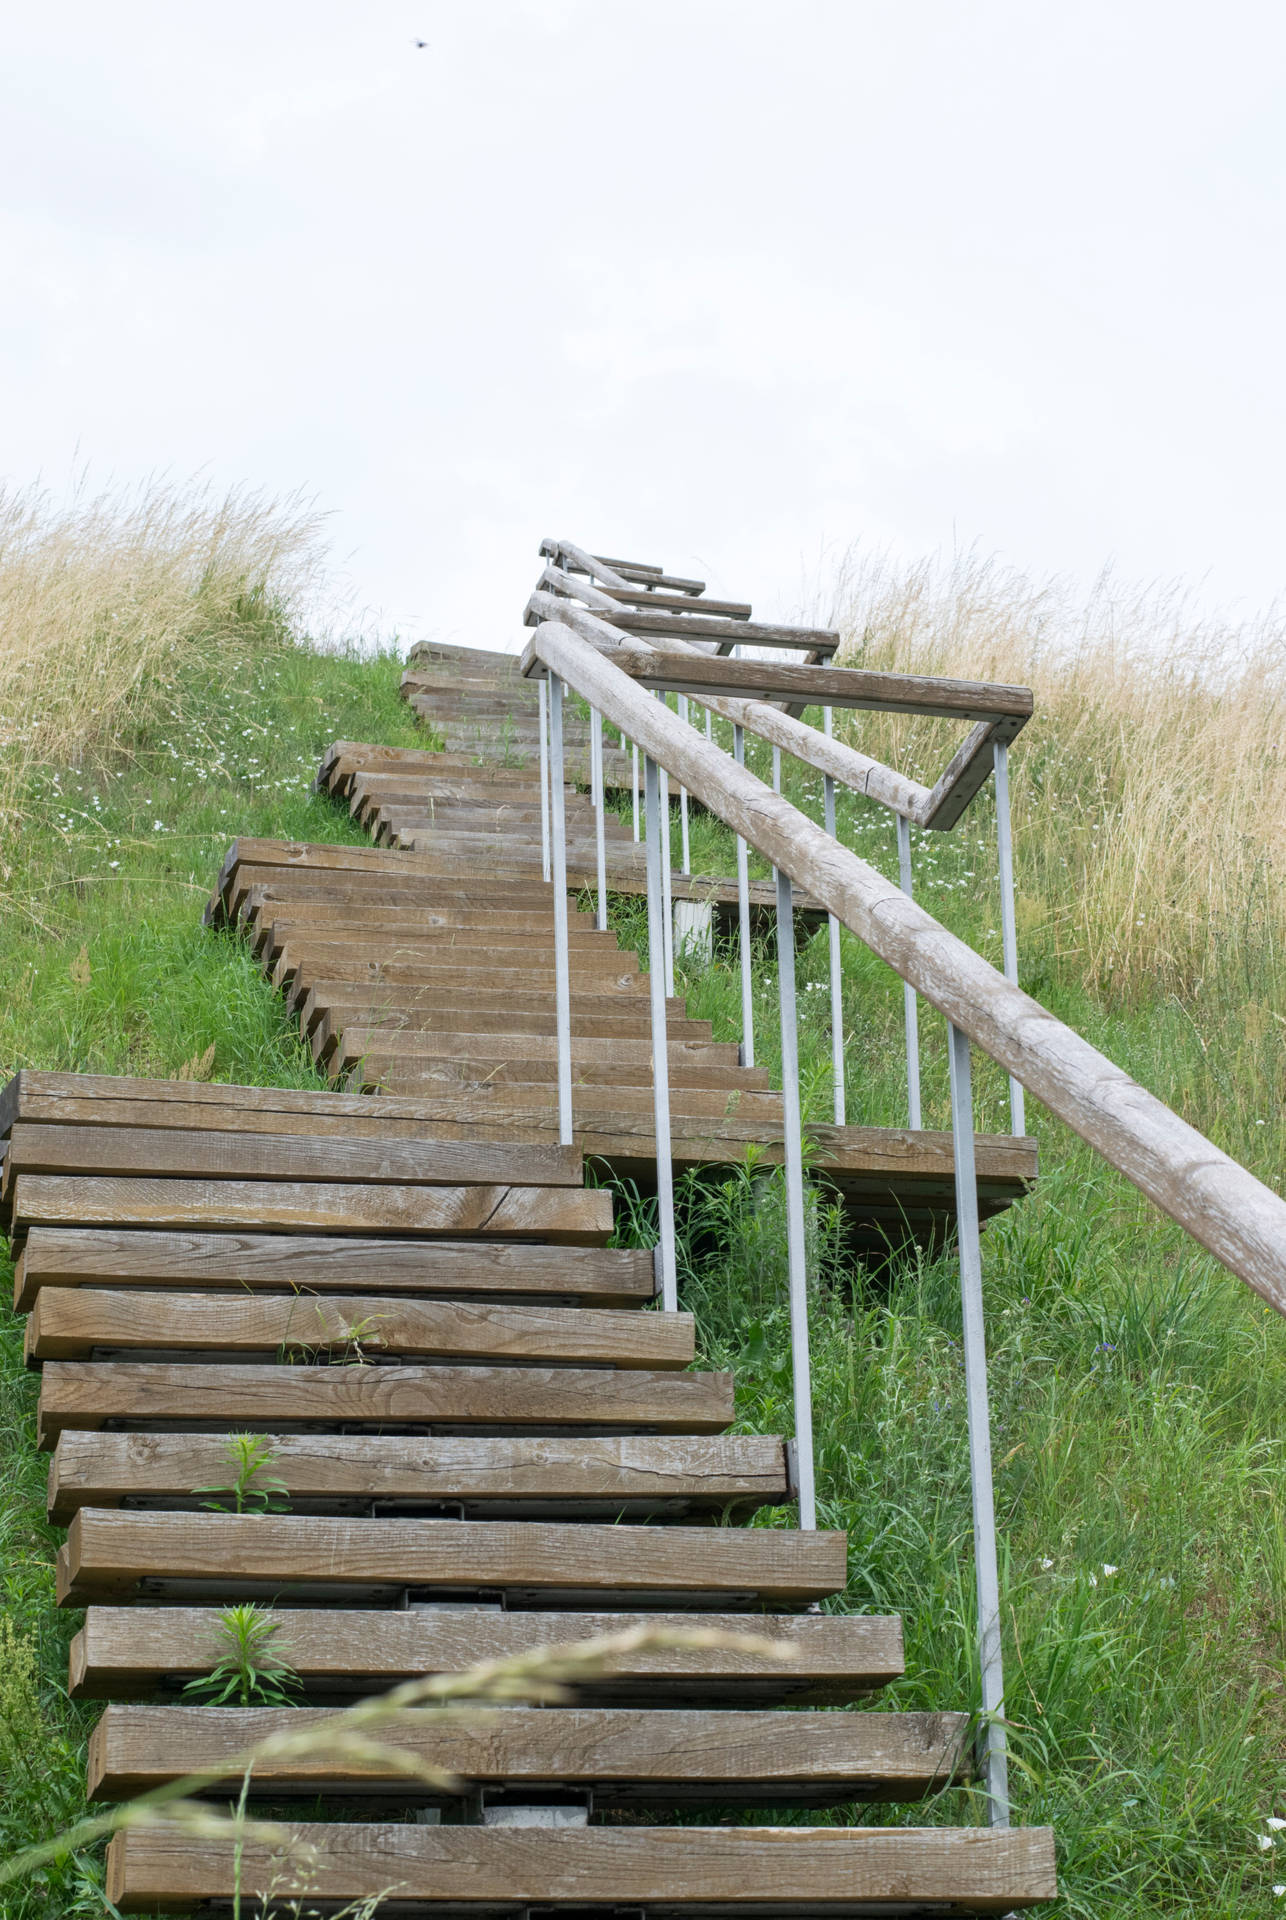 Wooden Staircase Surrounded By Grass In Lithuania Wallpaper